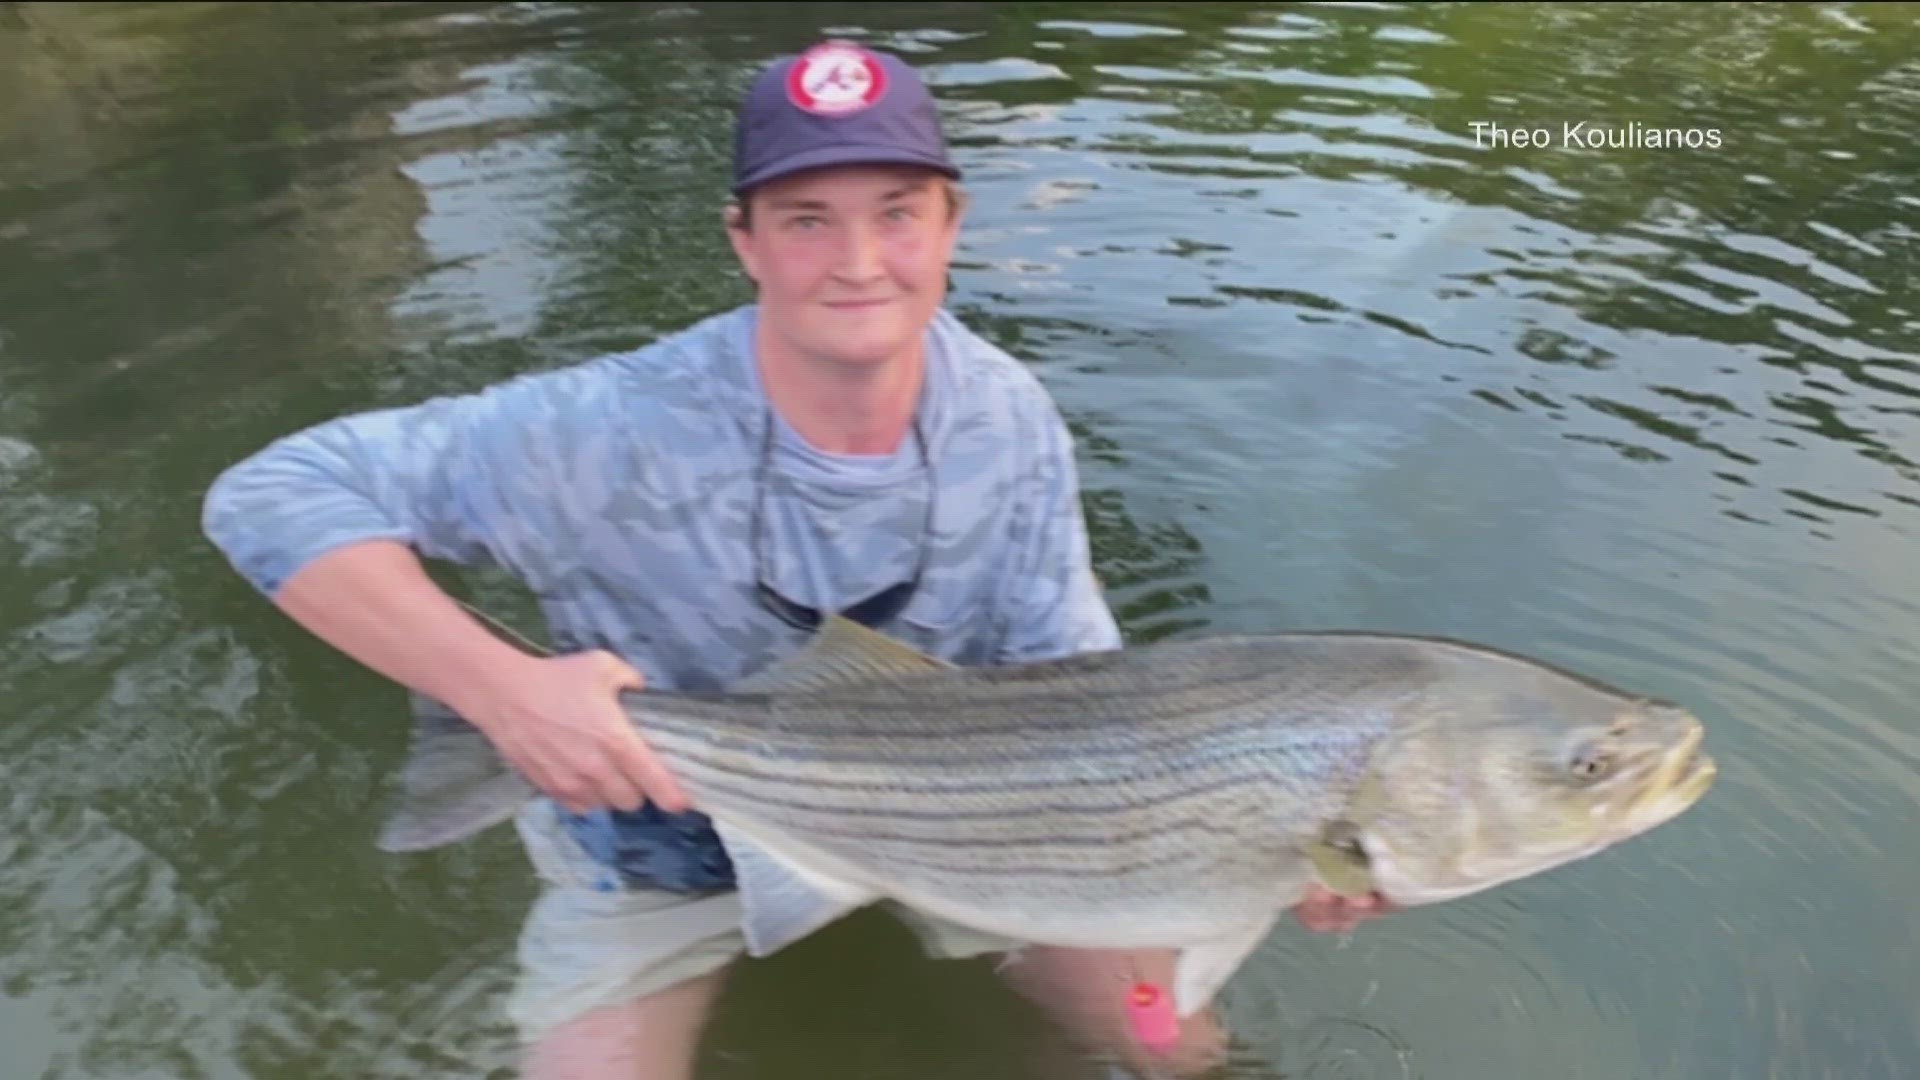 One recreational angler caught a huge striped bass in Austin's Lady Bird Lake.